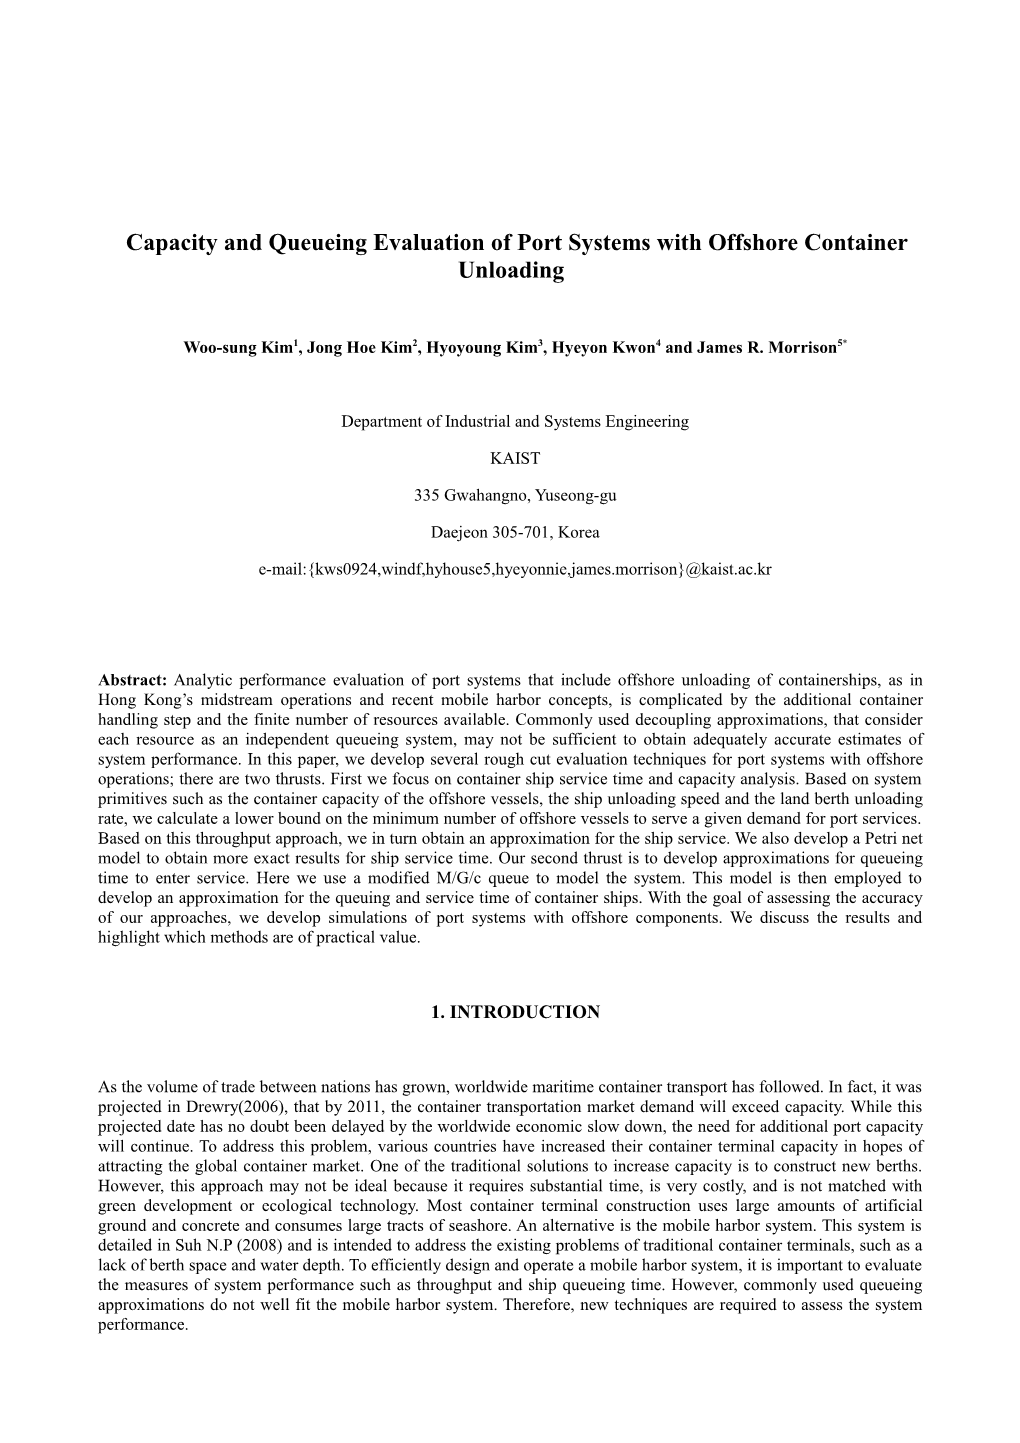 Capacity and Queueing Evaluation of Port Systems with Offshore Container Unloading